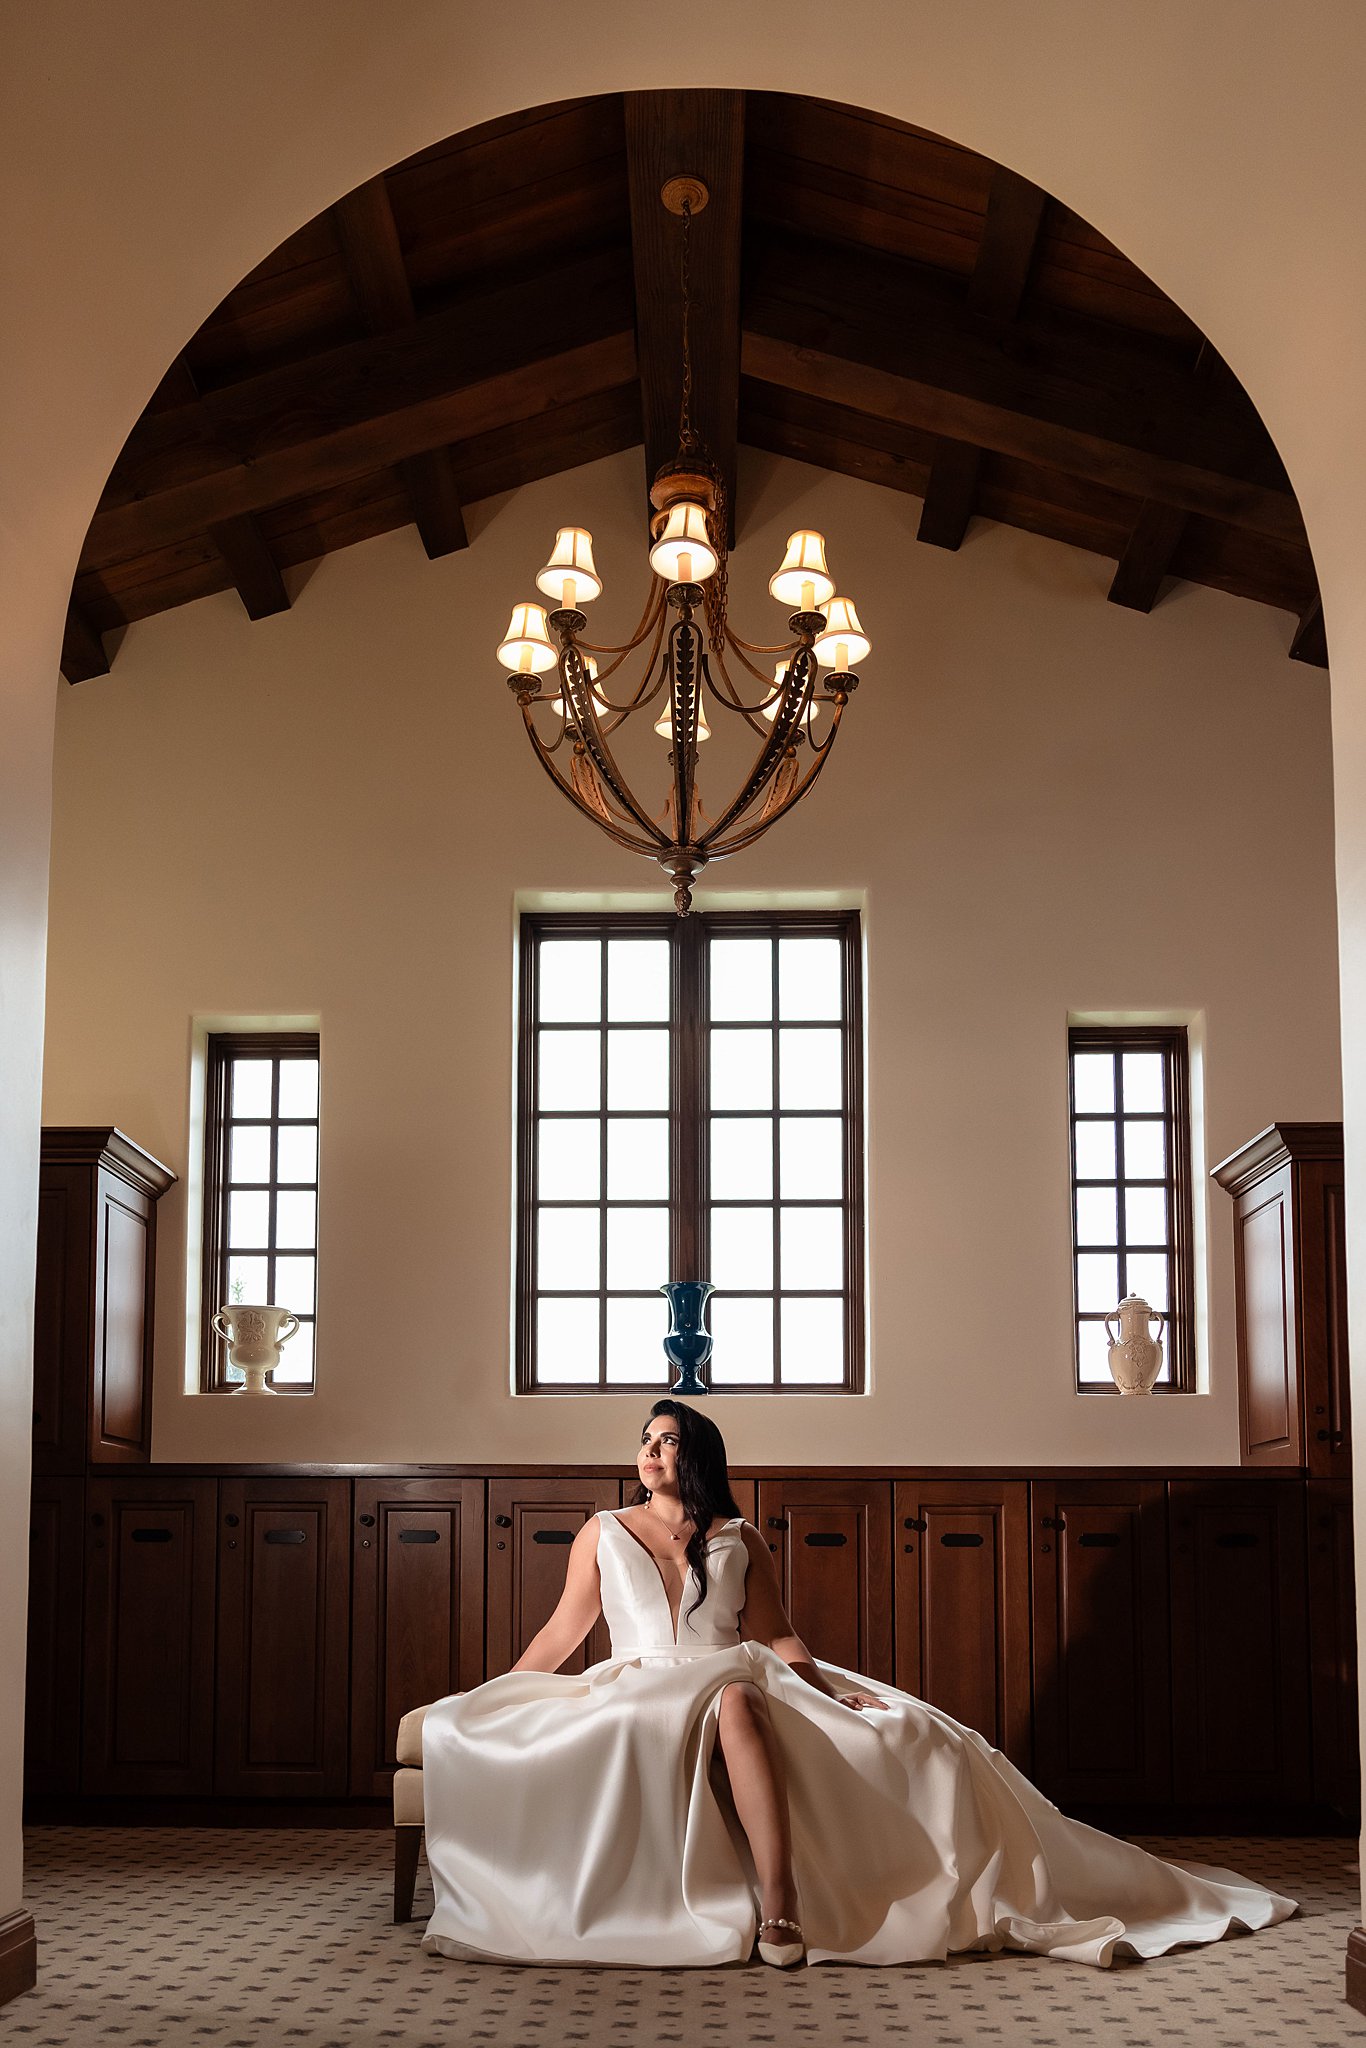 A bride sits on a bench in her ornate getting ready room in a silk dress